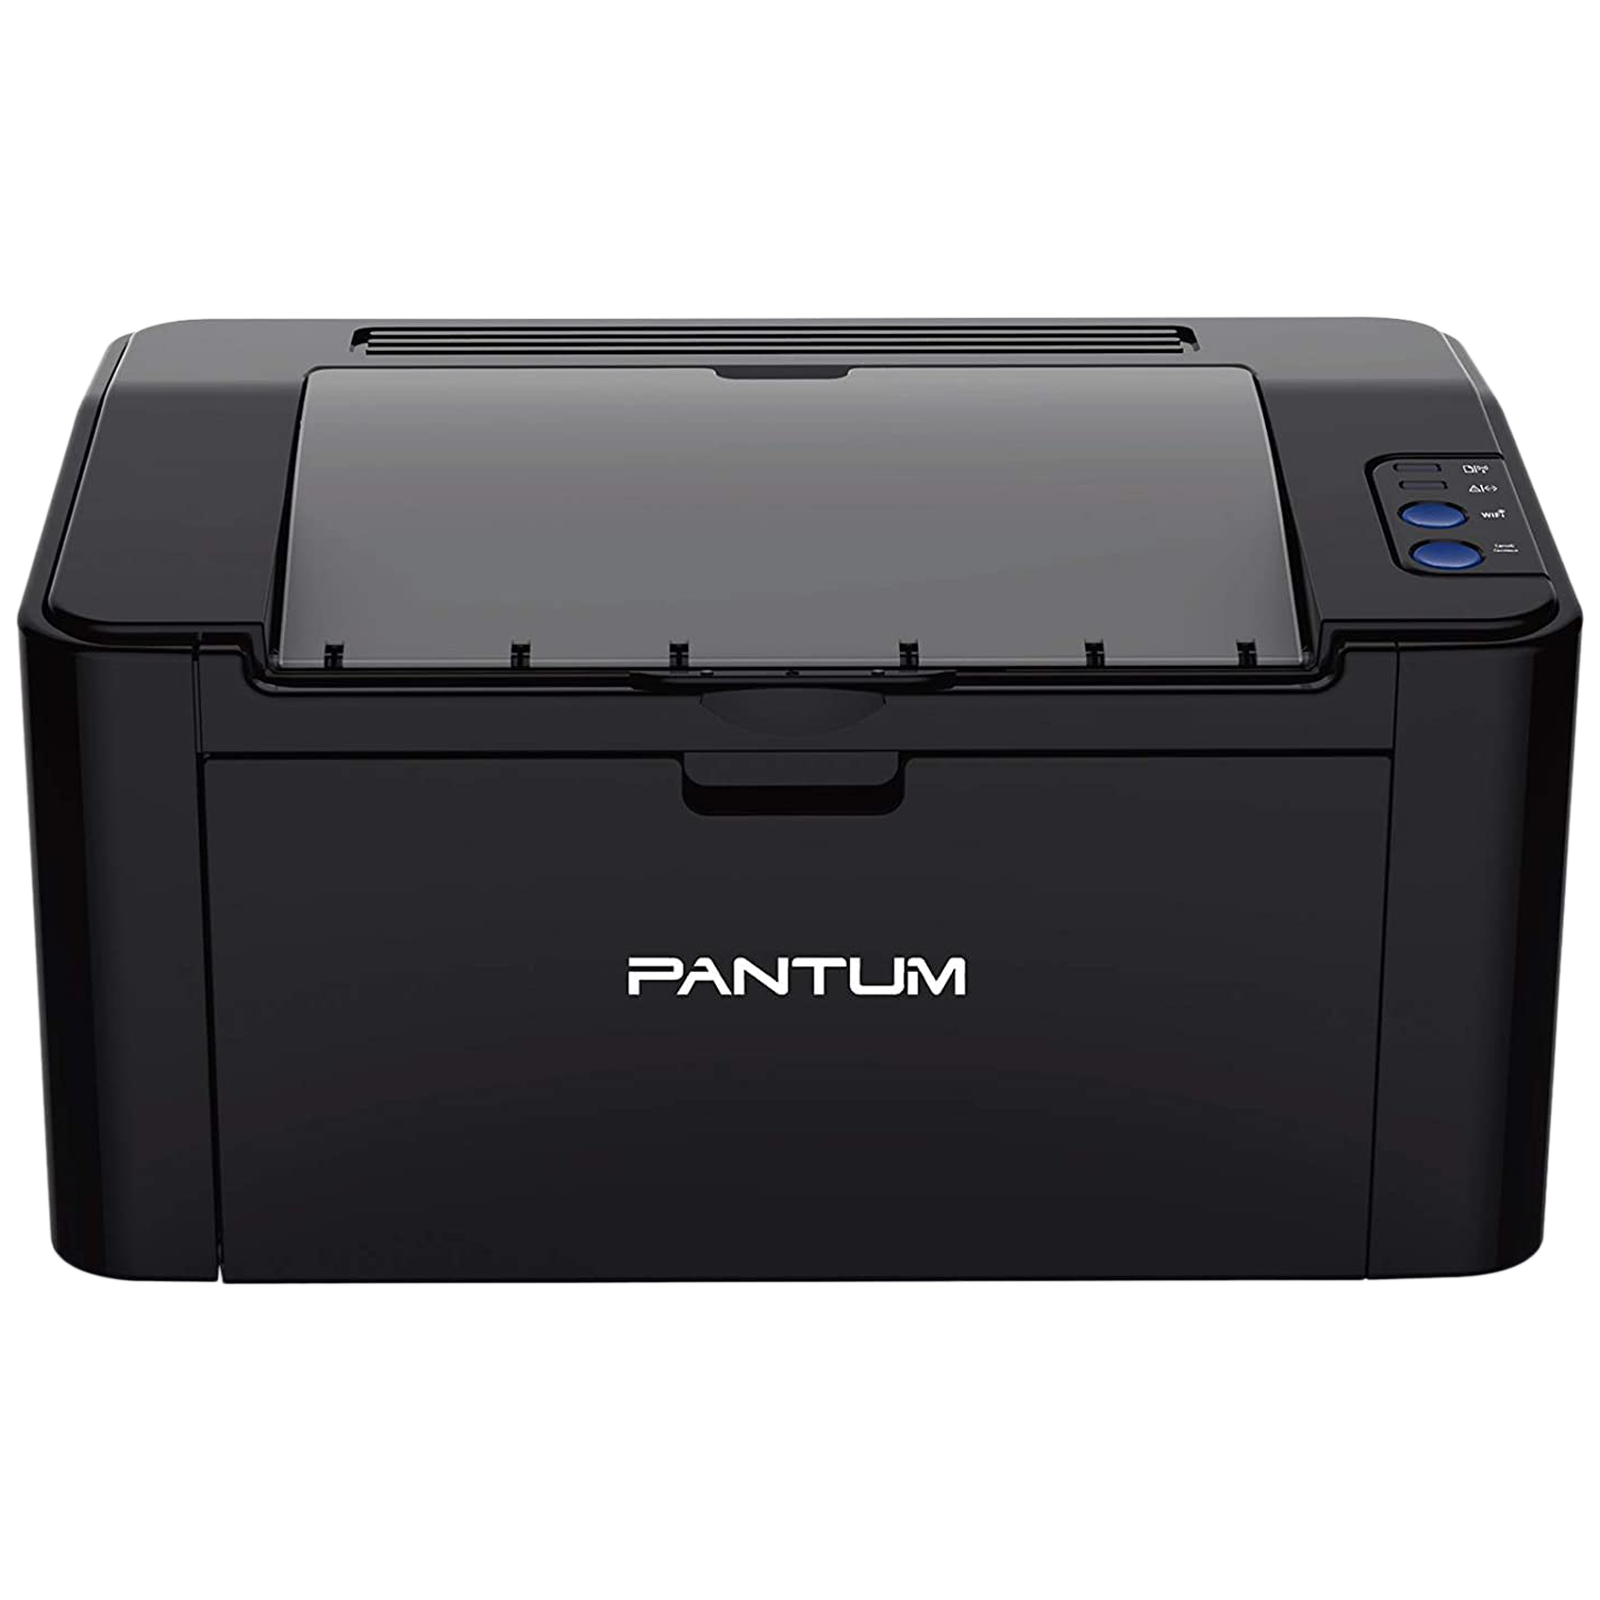 PANTUM Black & White Single-Function Laserjet Printer (15000 Pages Max Monthly Duty Cycle, P2518, Black)